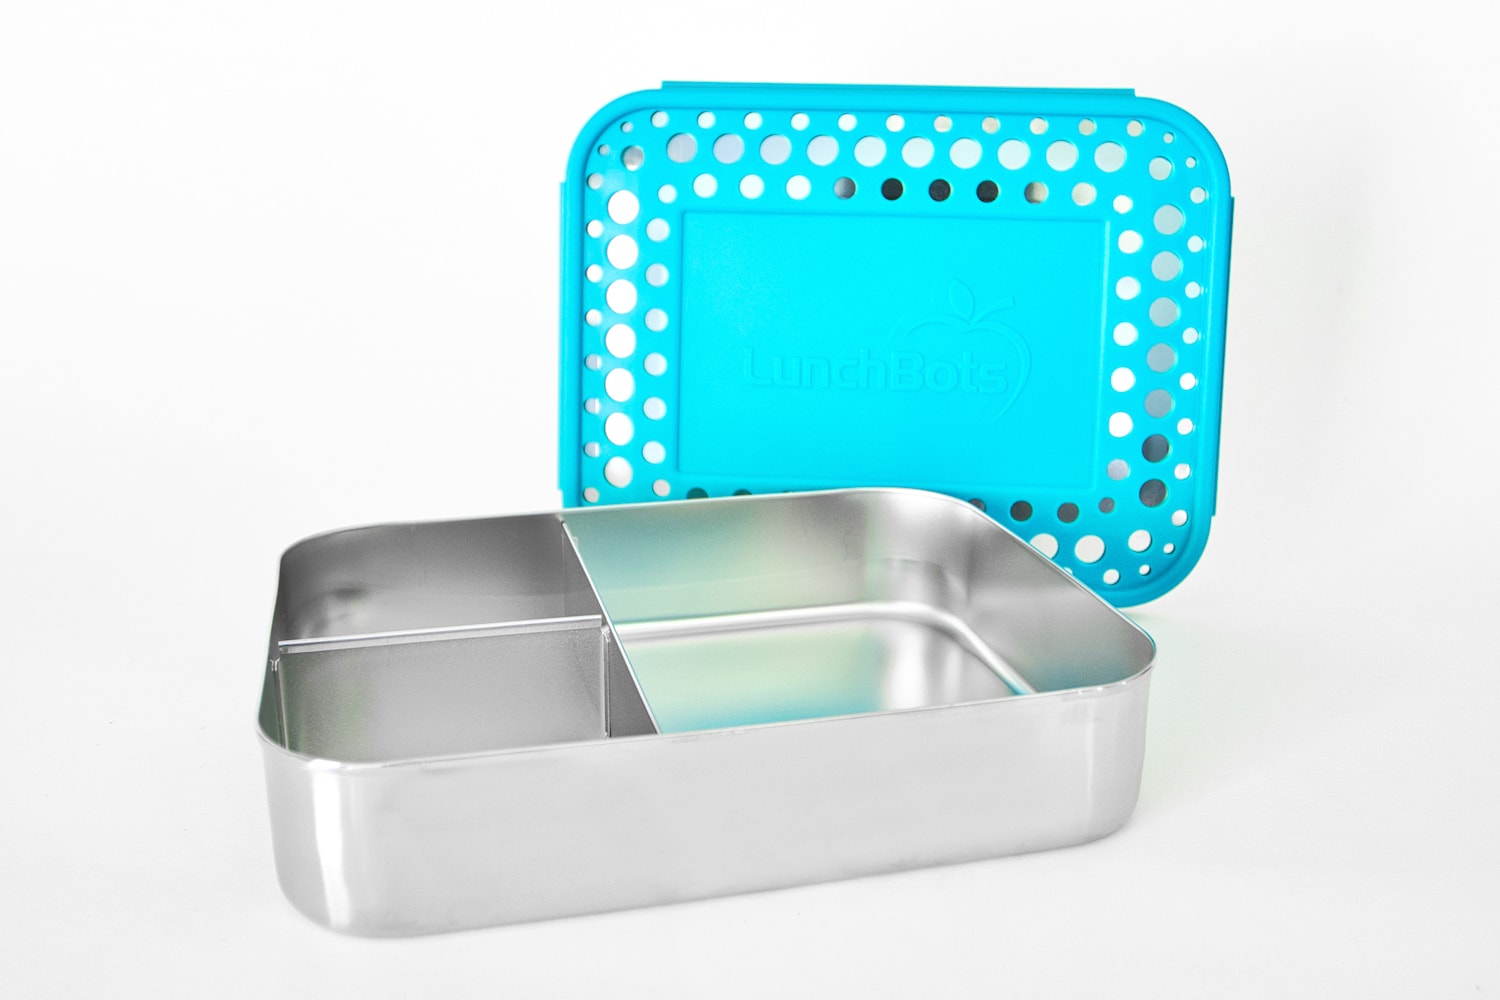 Fits Full Sandwich Stainless Steel Bento Box for Kids Eco Friendly 3 Section Lunch Container 2 Snacks Women Adults with BONUS Spoon Large Metal Lunch Box for Men Top FDA Standard Steel 